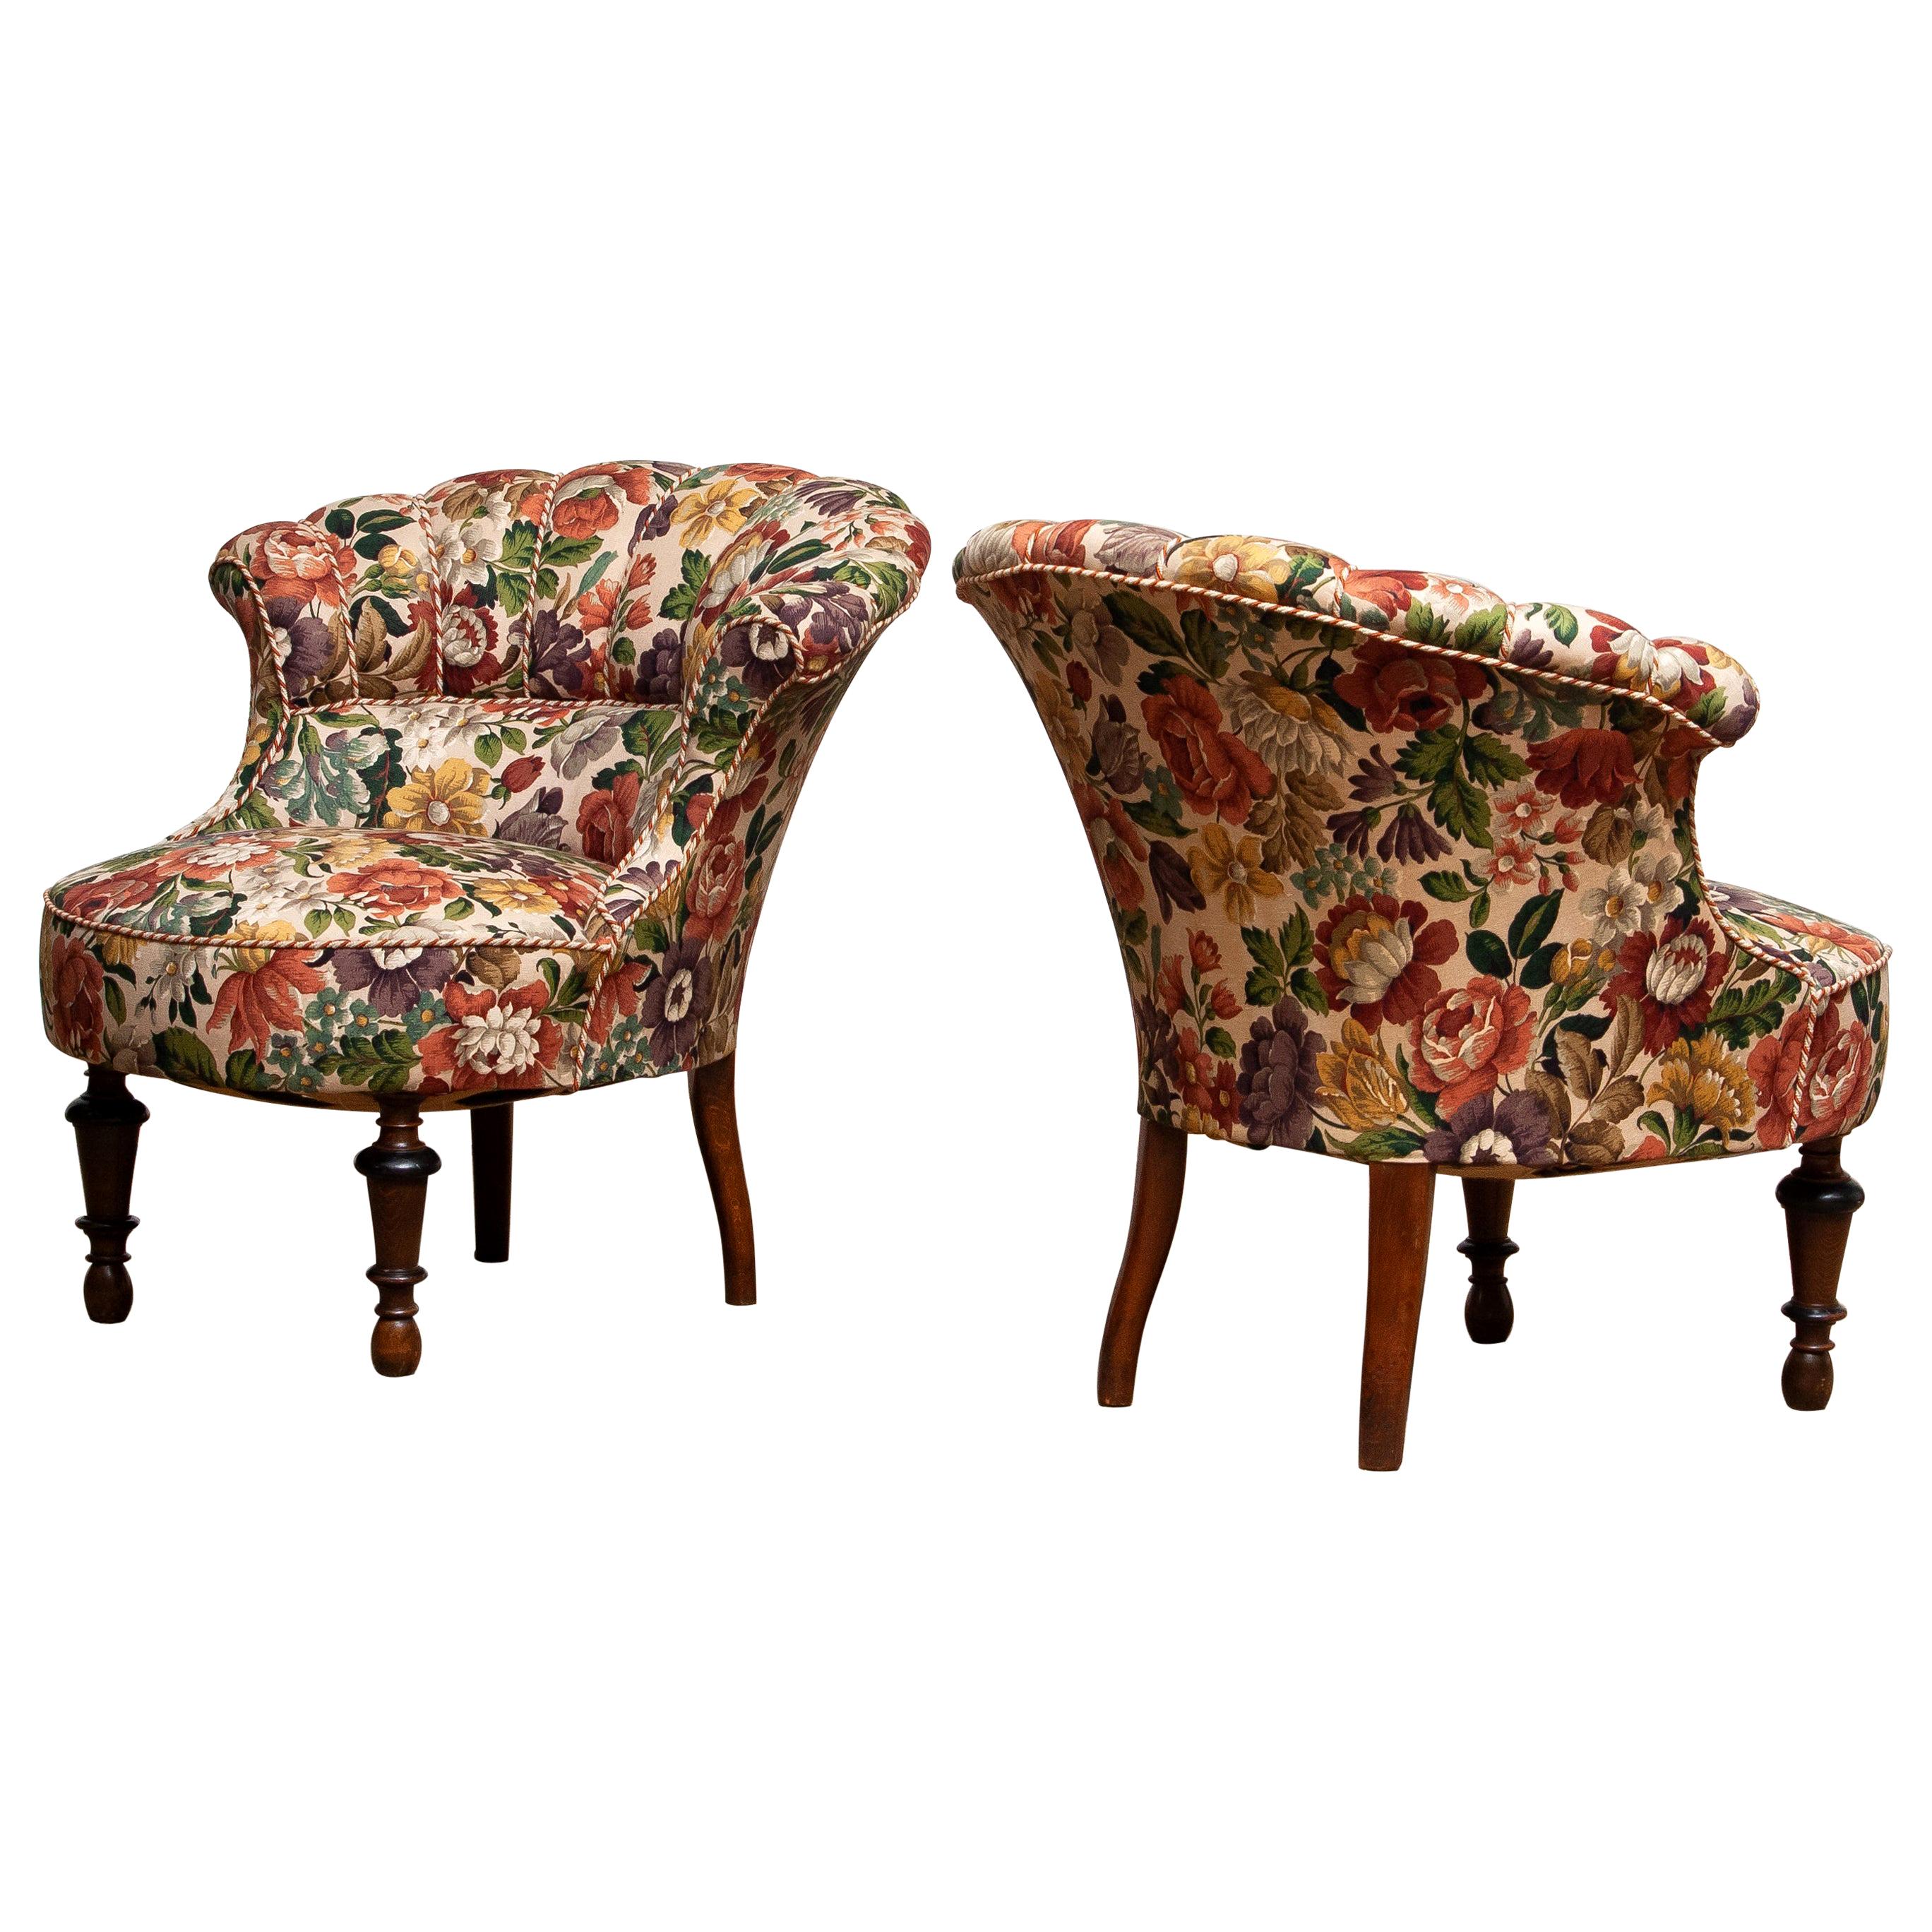 Beautiful and completely restored set of two, French Napoleon III slipper chairs from the 19th century, covered with floral printed fabric.
New fabric, bindings, springs.
The overall condition of these two chairs is very good!